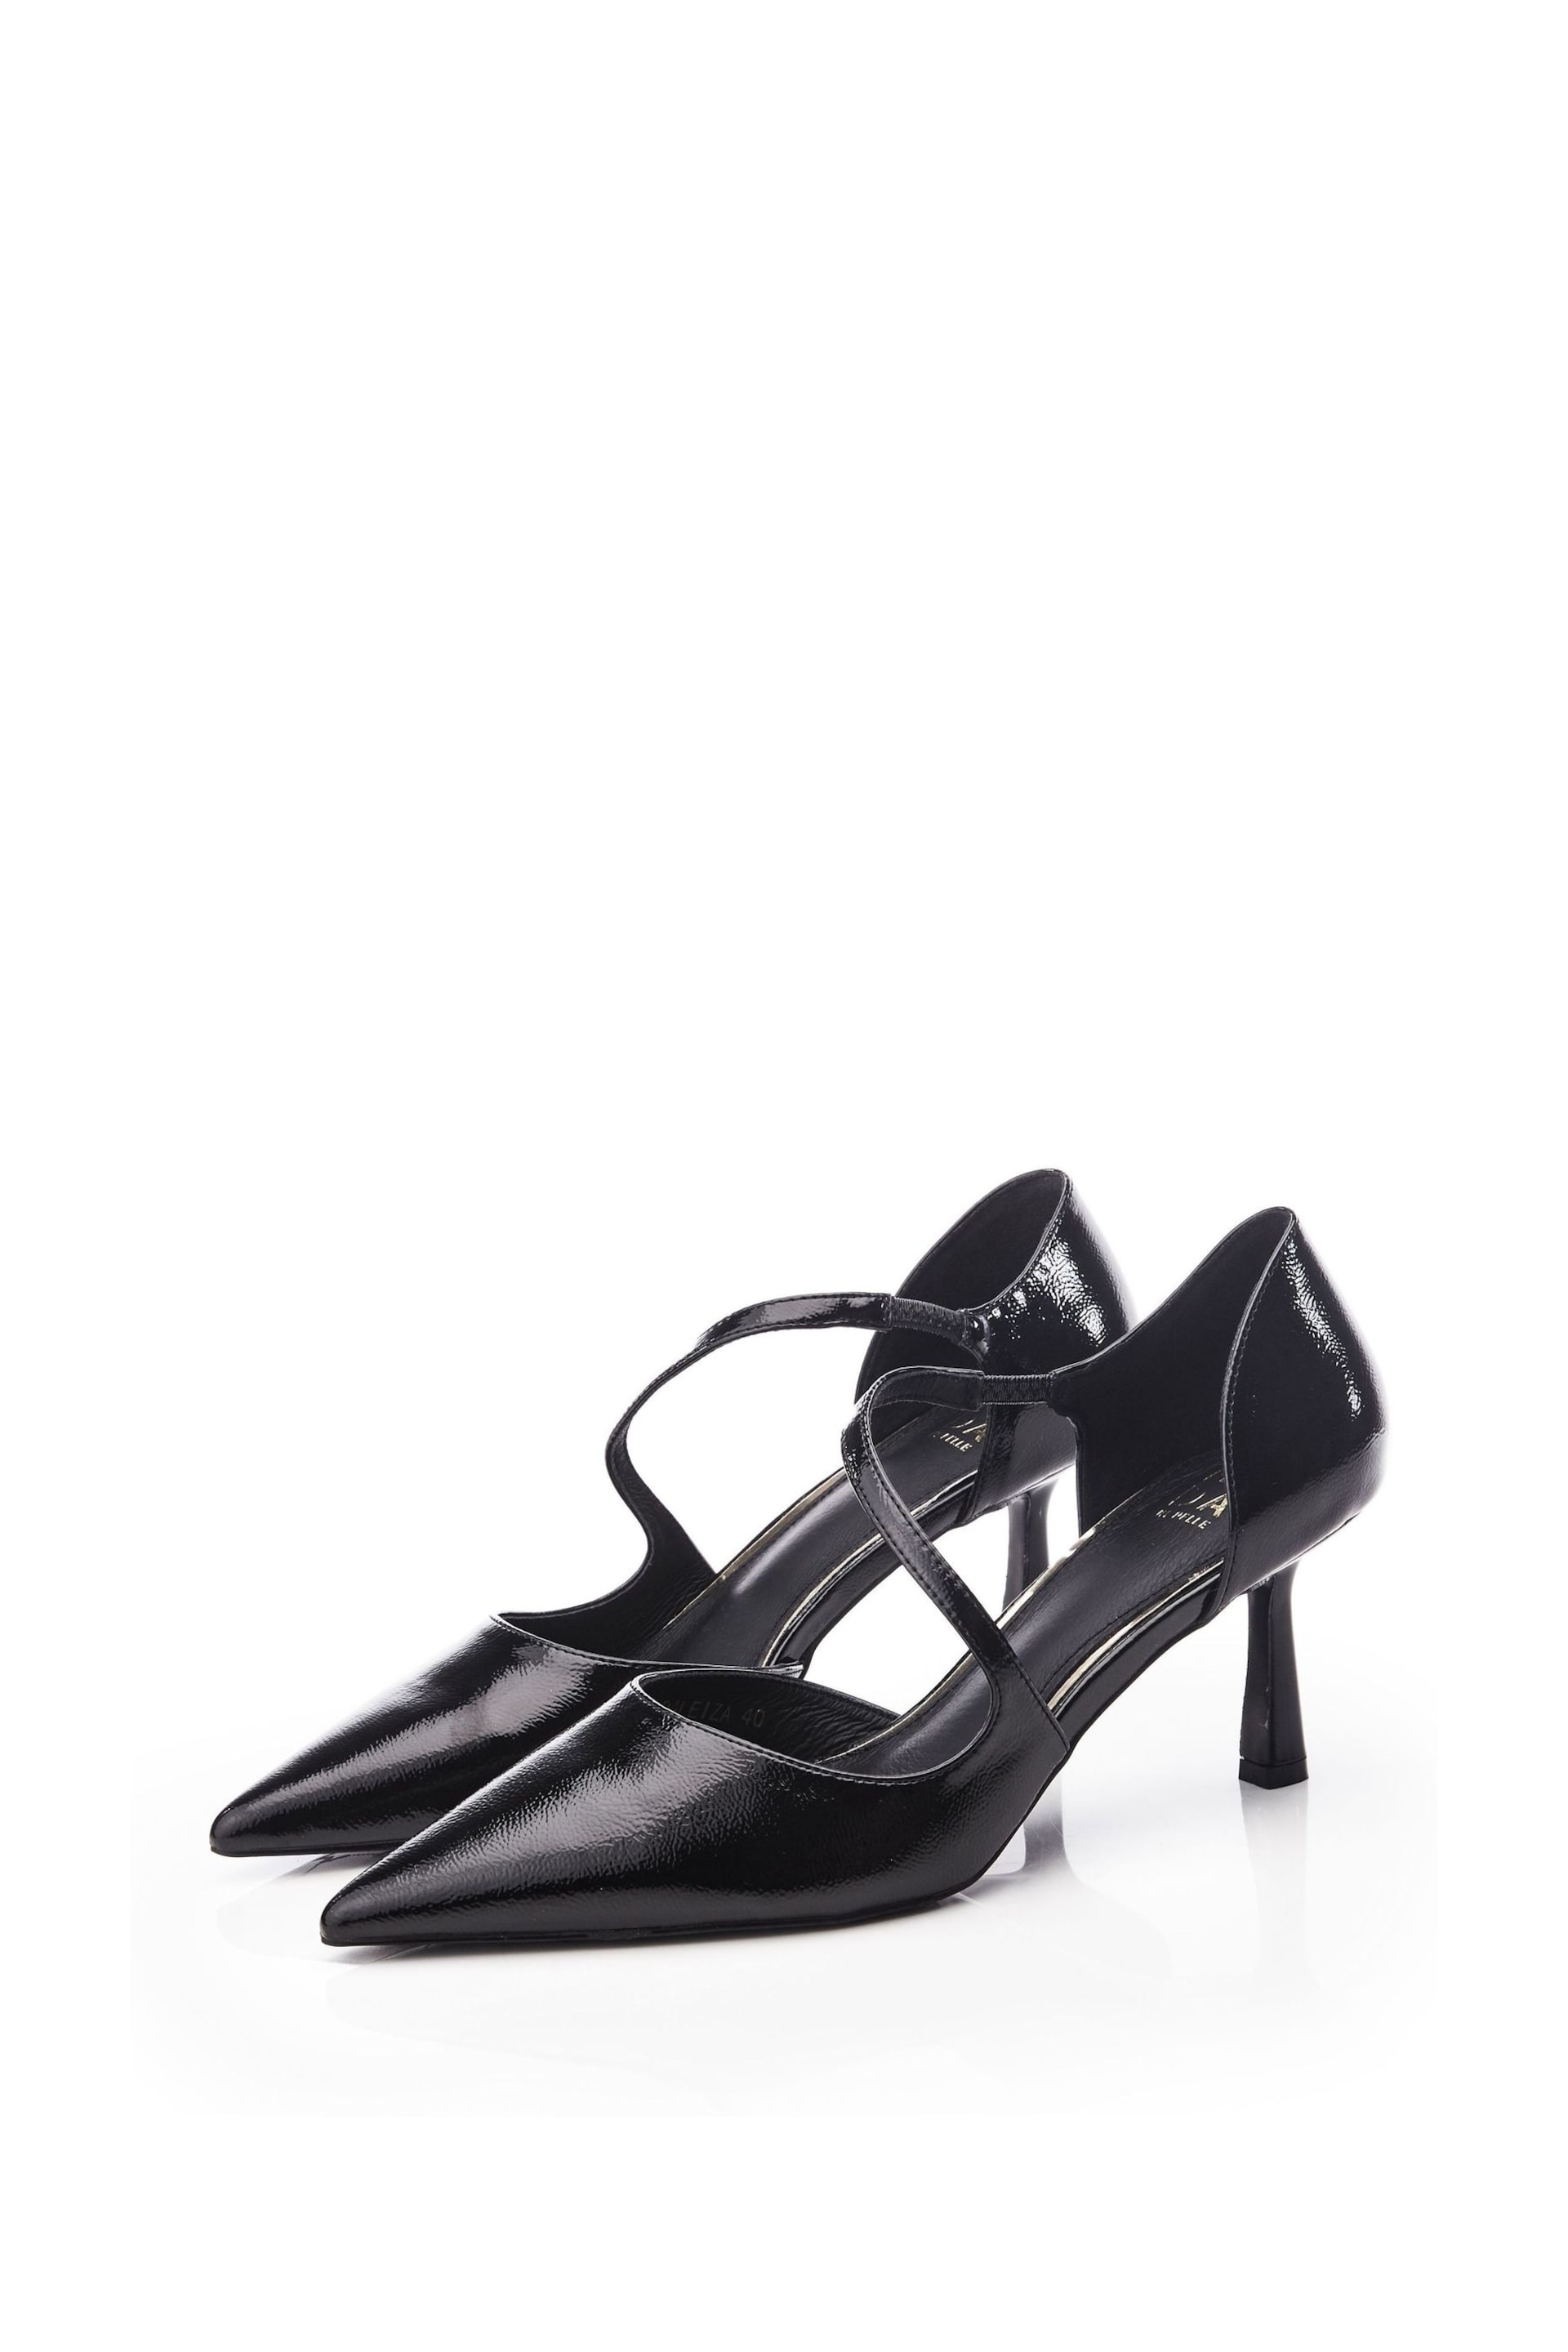 Moda in Pelle Daleiza Heeled Pointed Crossover Court Black Shoes - Image 2 of 4